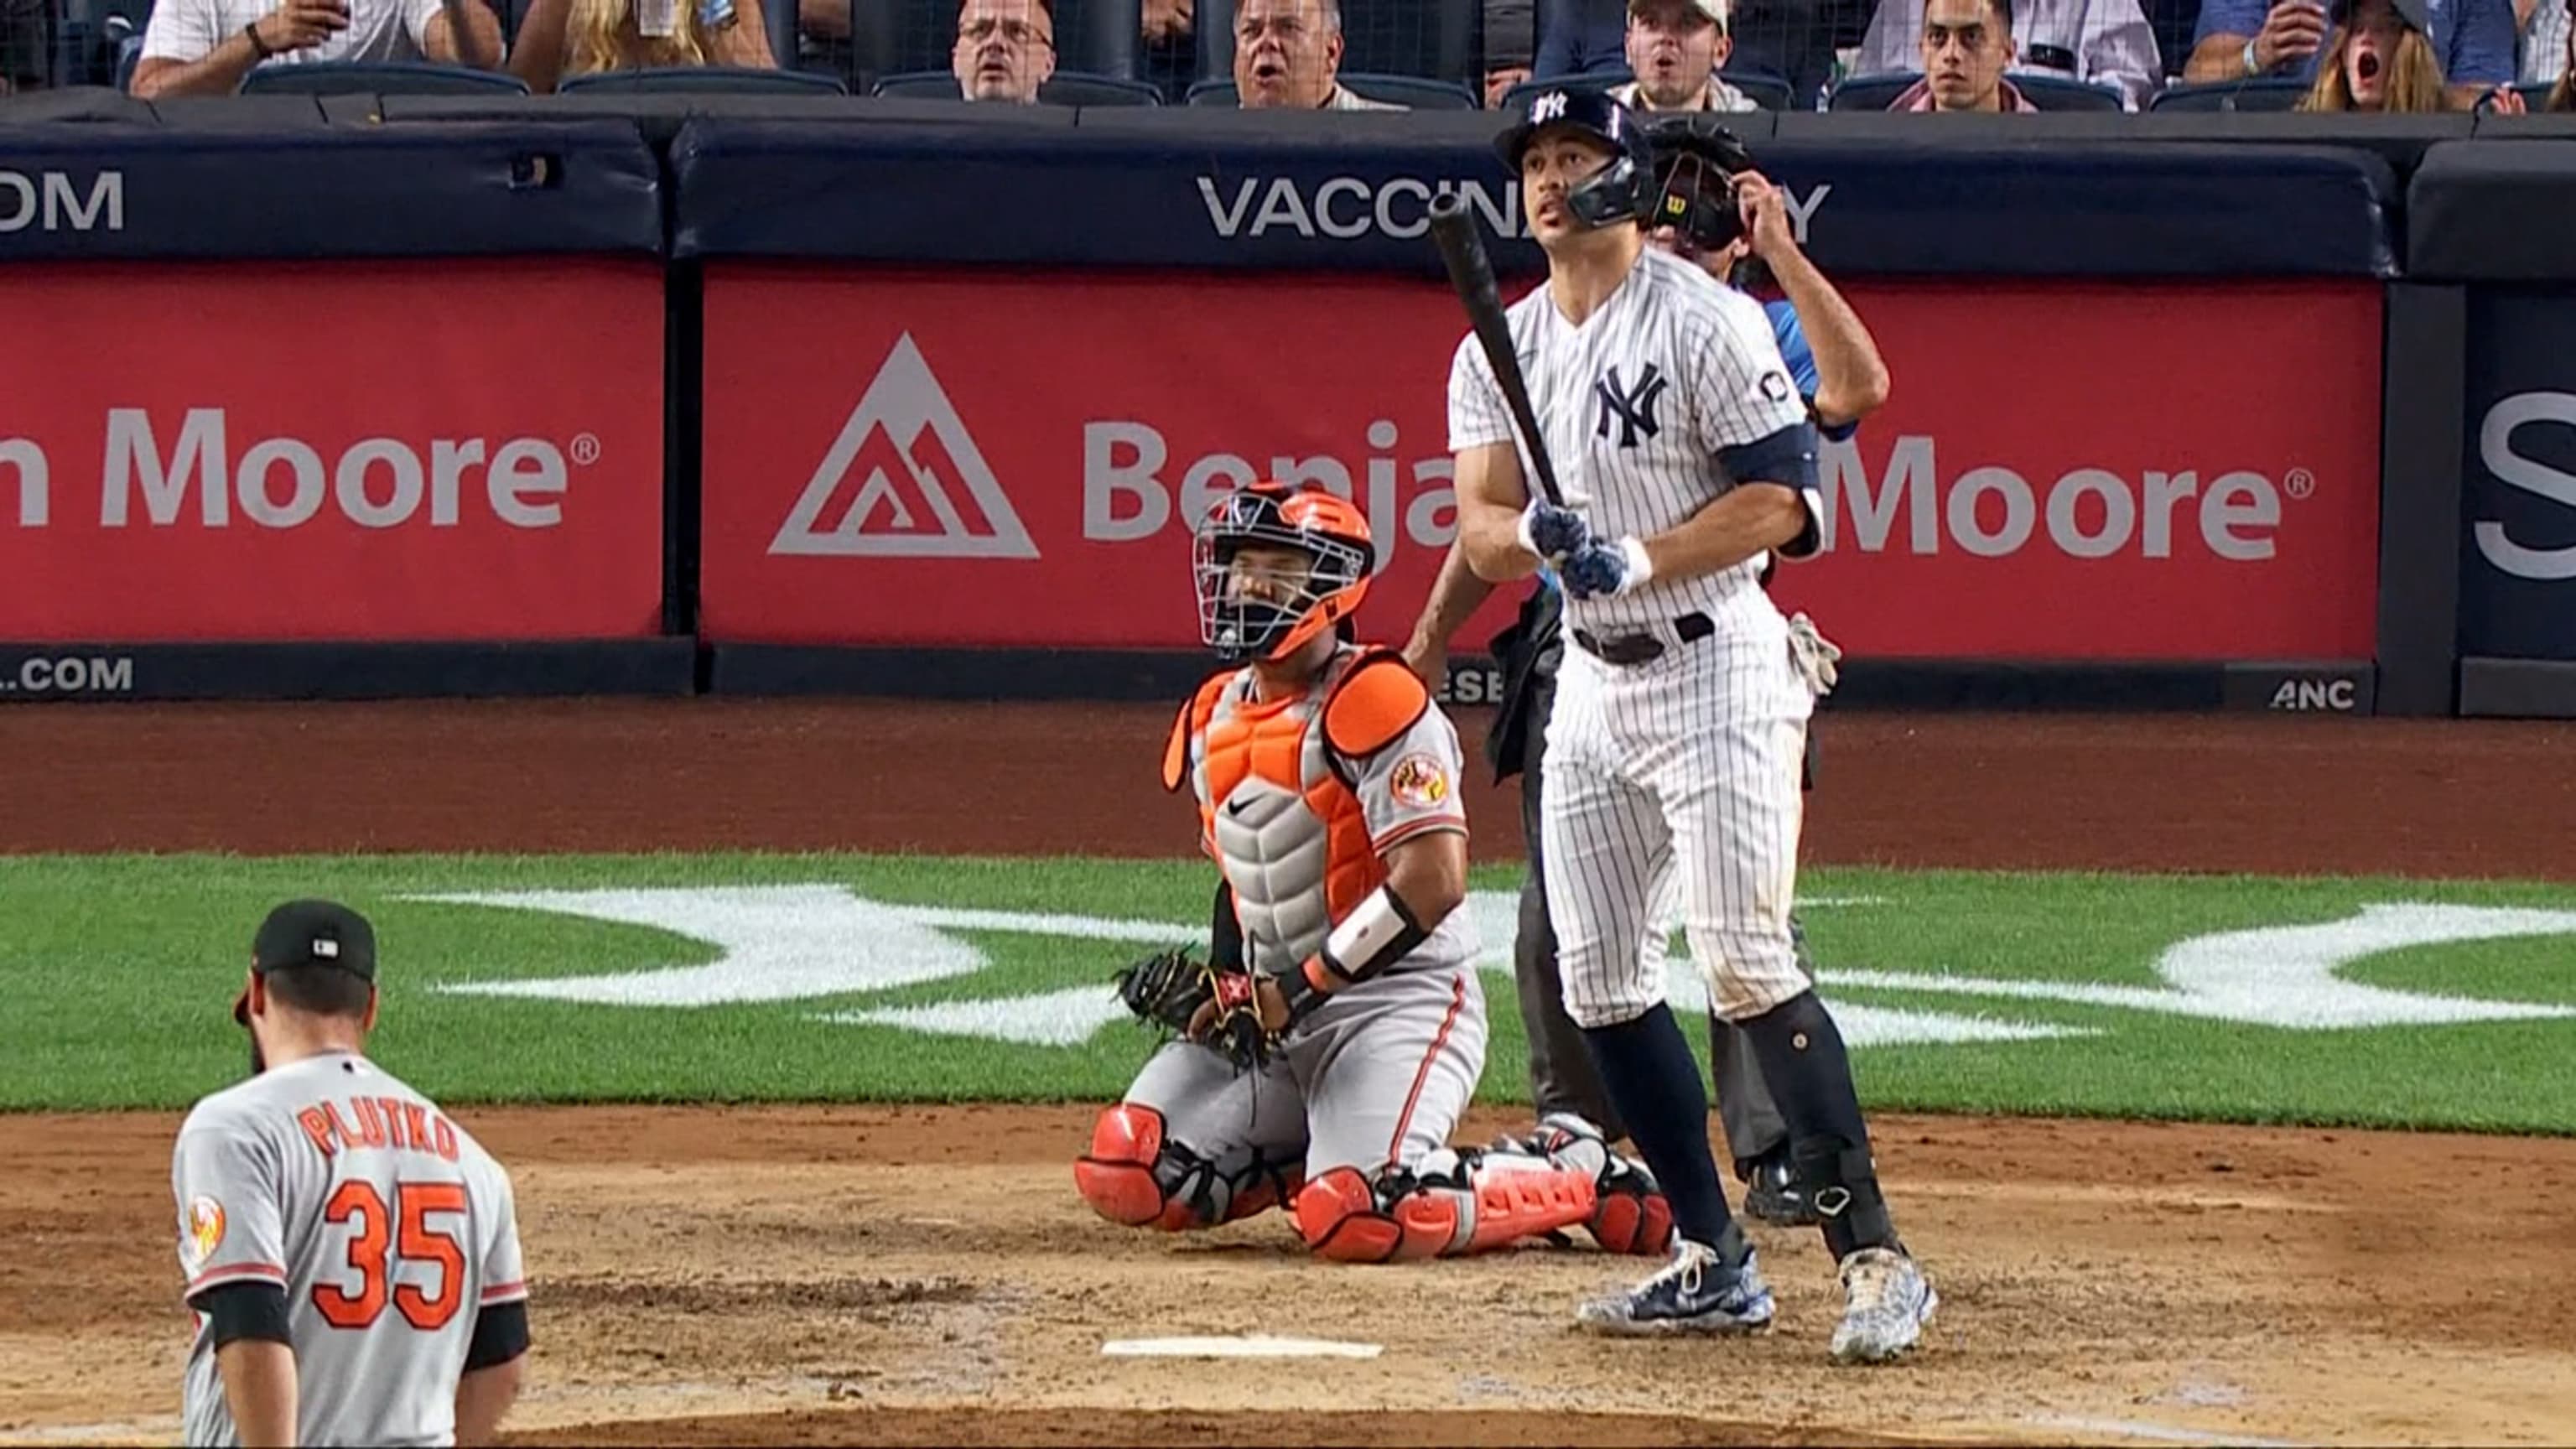 Do you expect Giancarlo Stanton to finish his career with over 500 home  runs? - Quora